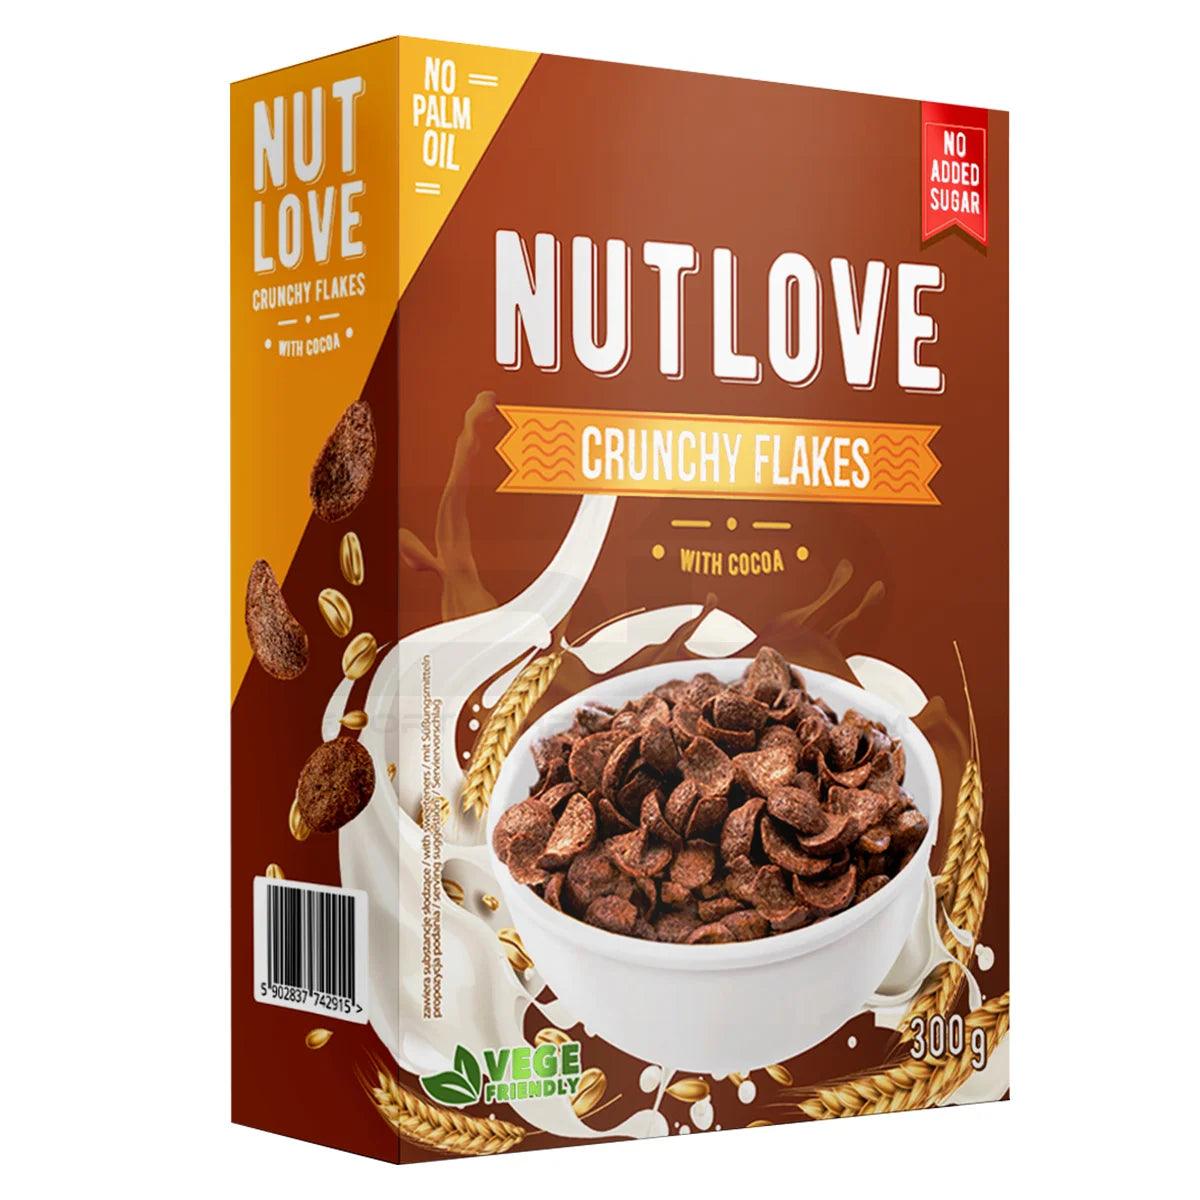 ALL NUTRITION® NUTLOVE CRUNCHY FLAKES 300g - Supplement Support